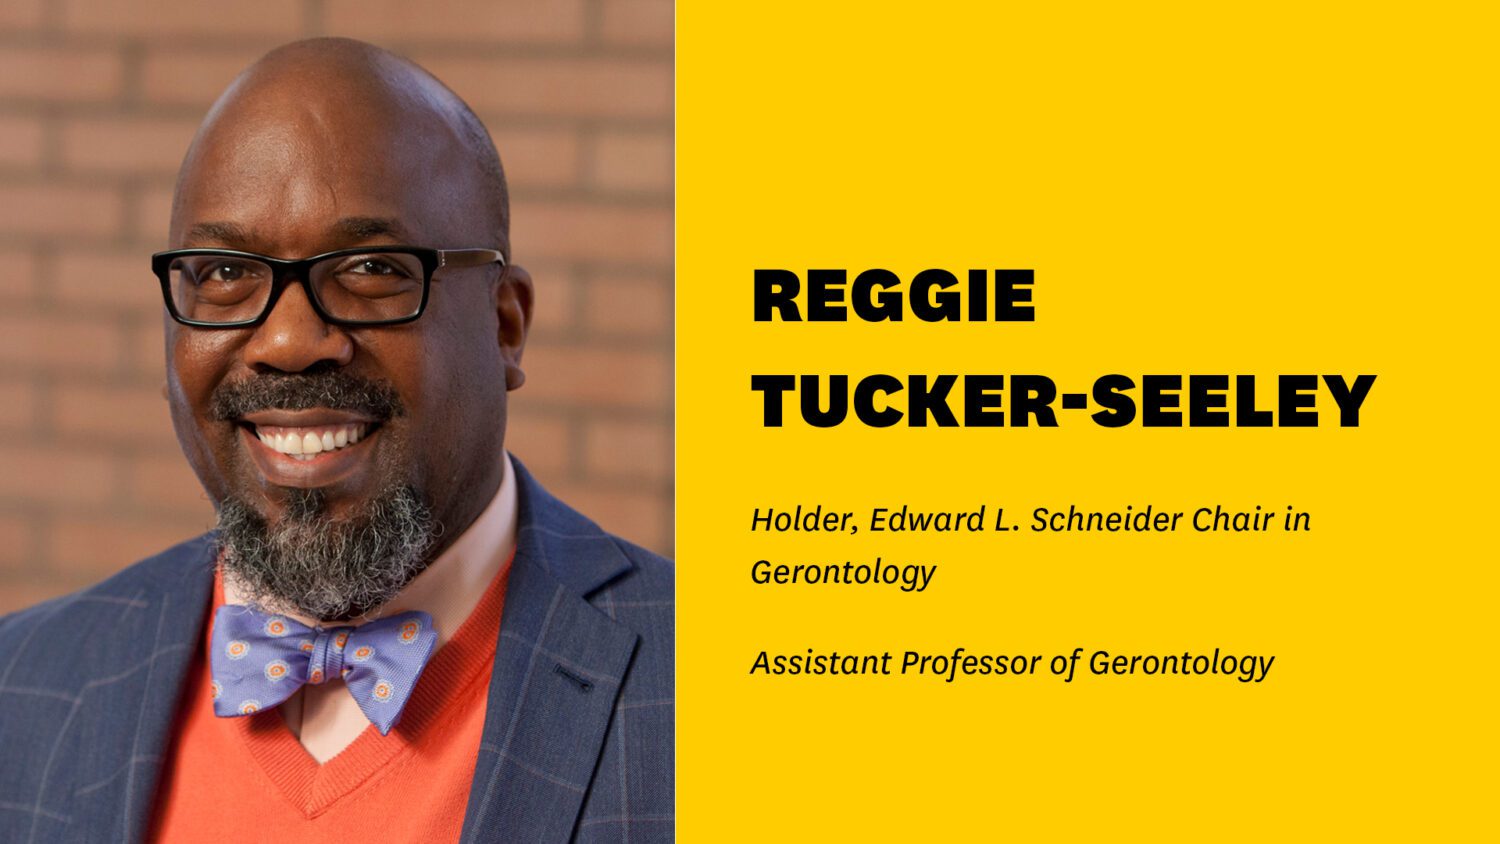 How racism is a threat to public health: A conversation between Reggie Tucker-Seeley and Jhumpka Ghupta